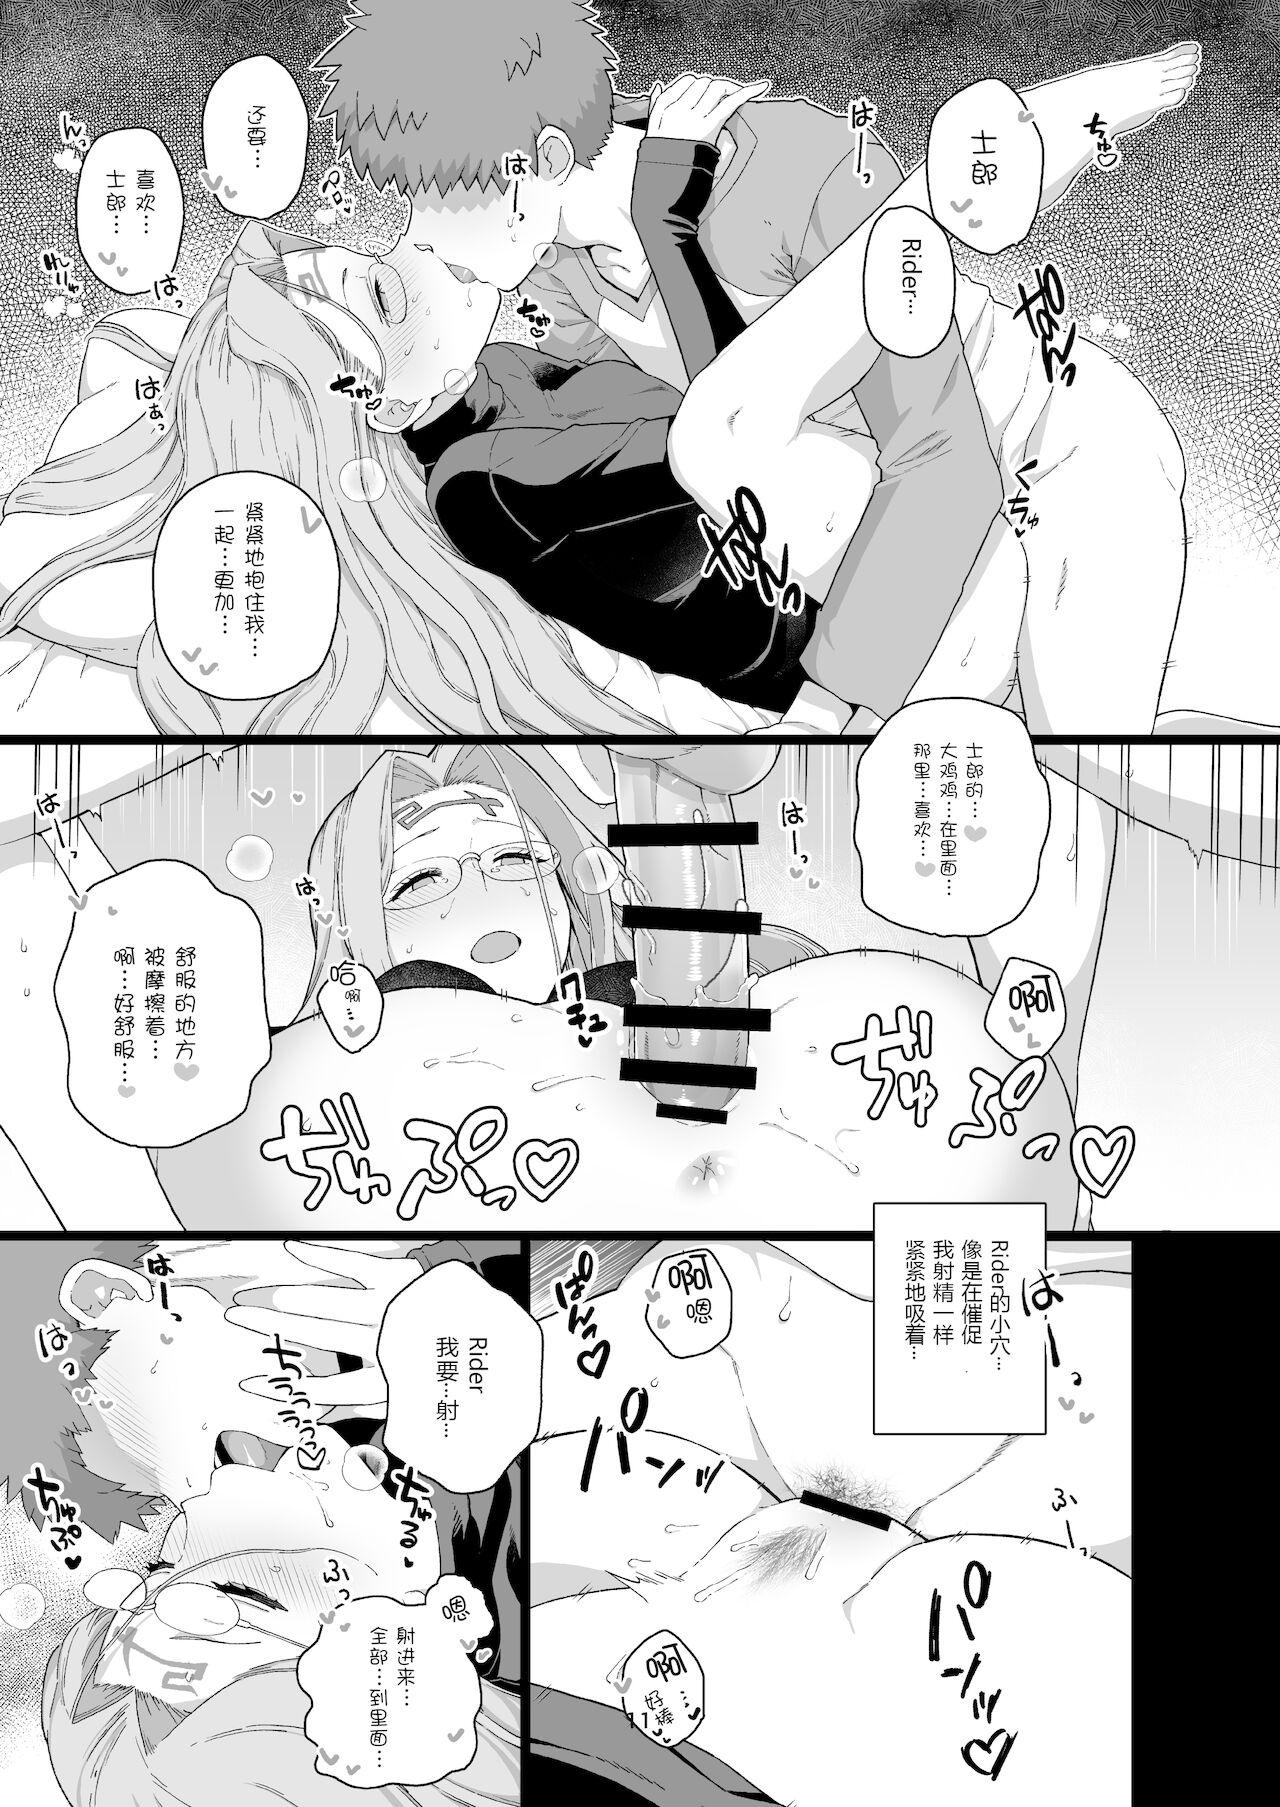 Squirting Rider-san no Tsumamigui - Fate stay night Bondagesex - Page 13